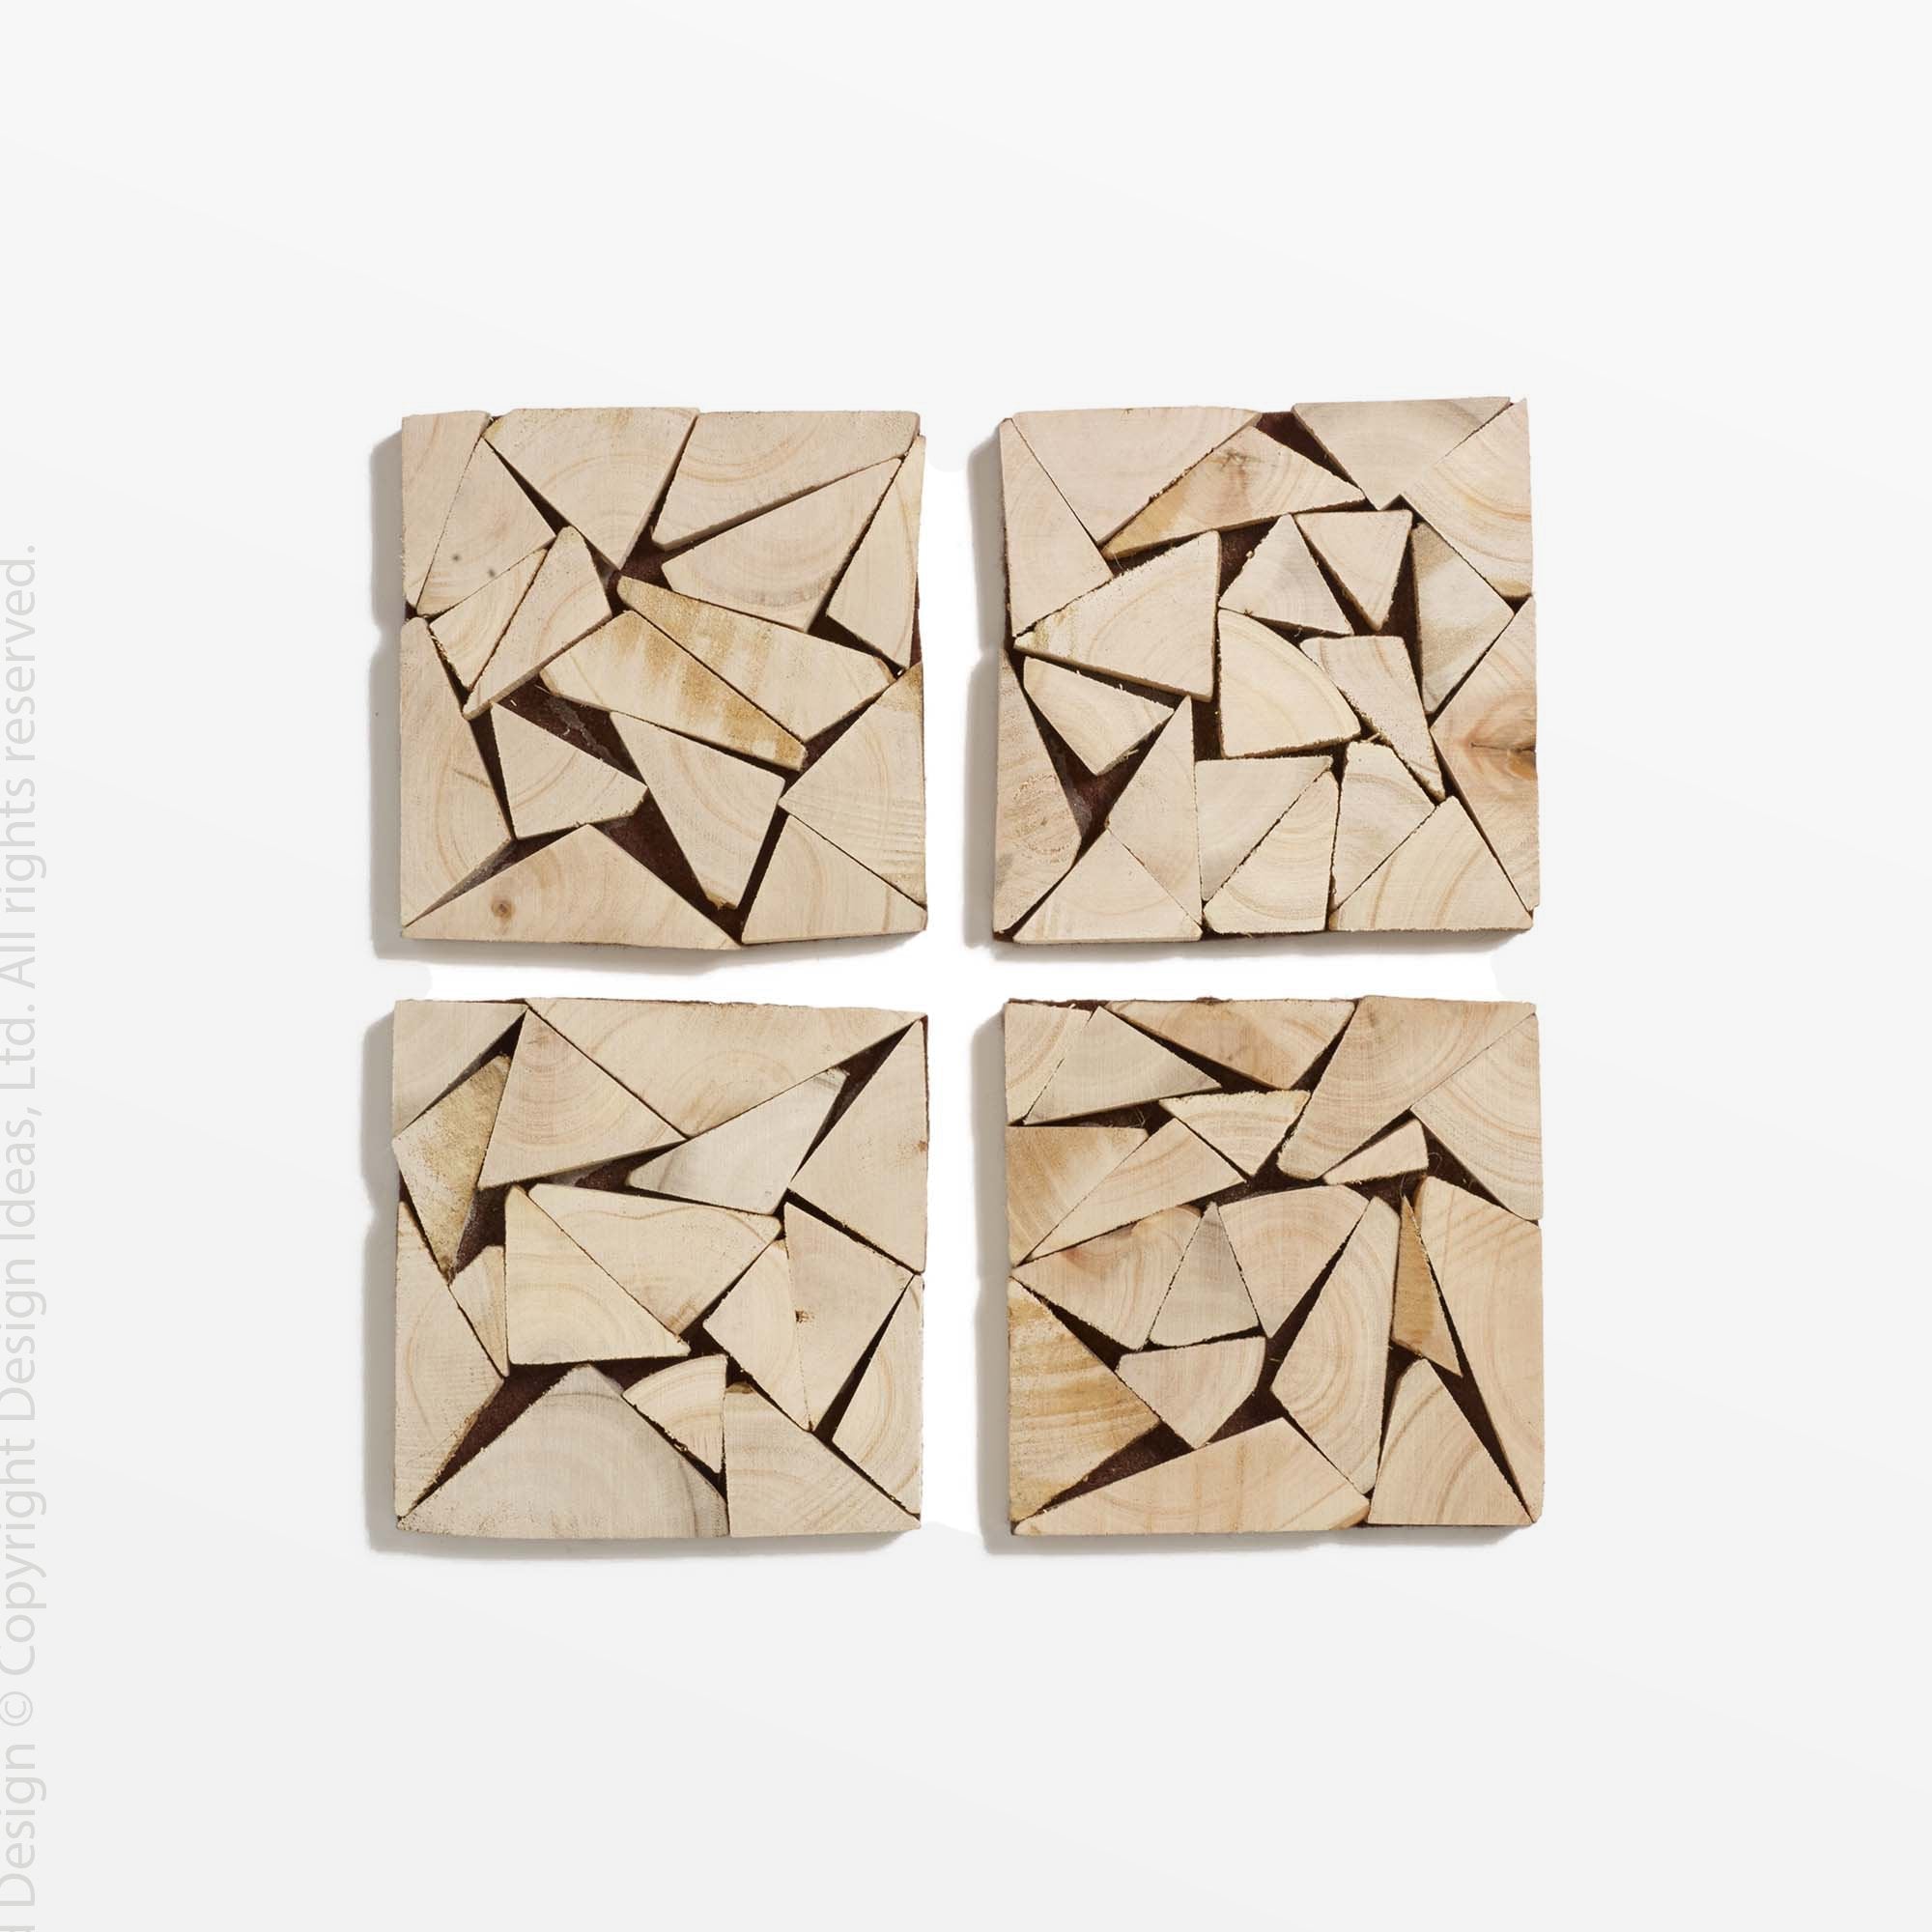 Wedge Wood Coaster - Natural Color | Image 1 | From the Wedge Collection | Skillfully handmade with natural wood for long lasting use | This coaster is sustainably sourced | Available in natural color | texxture home